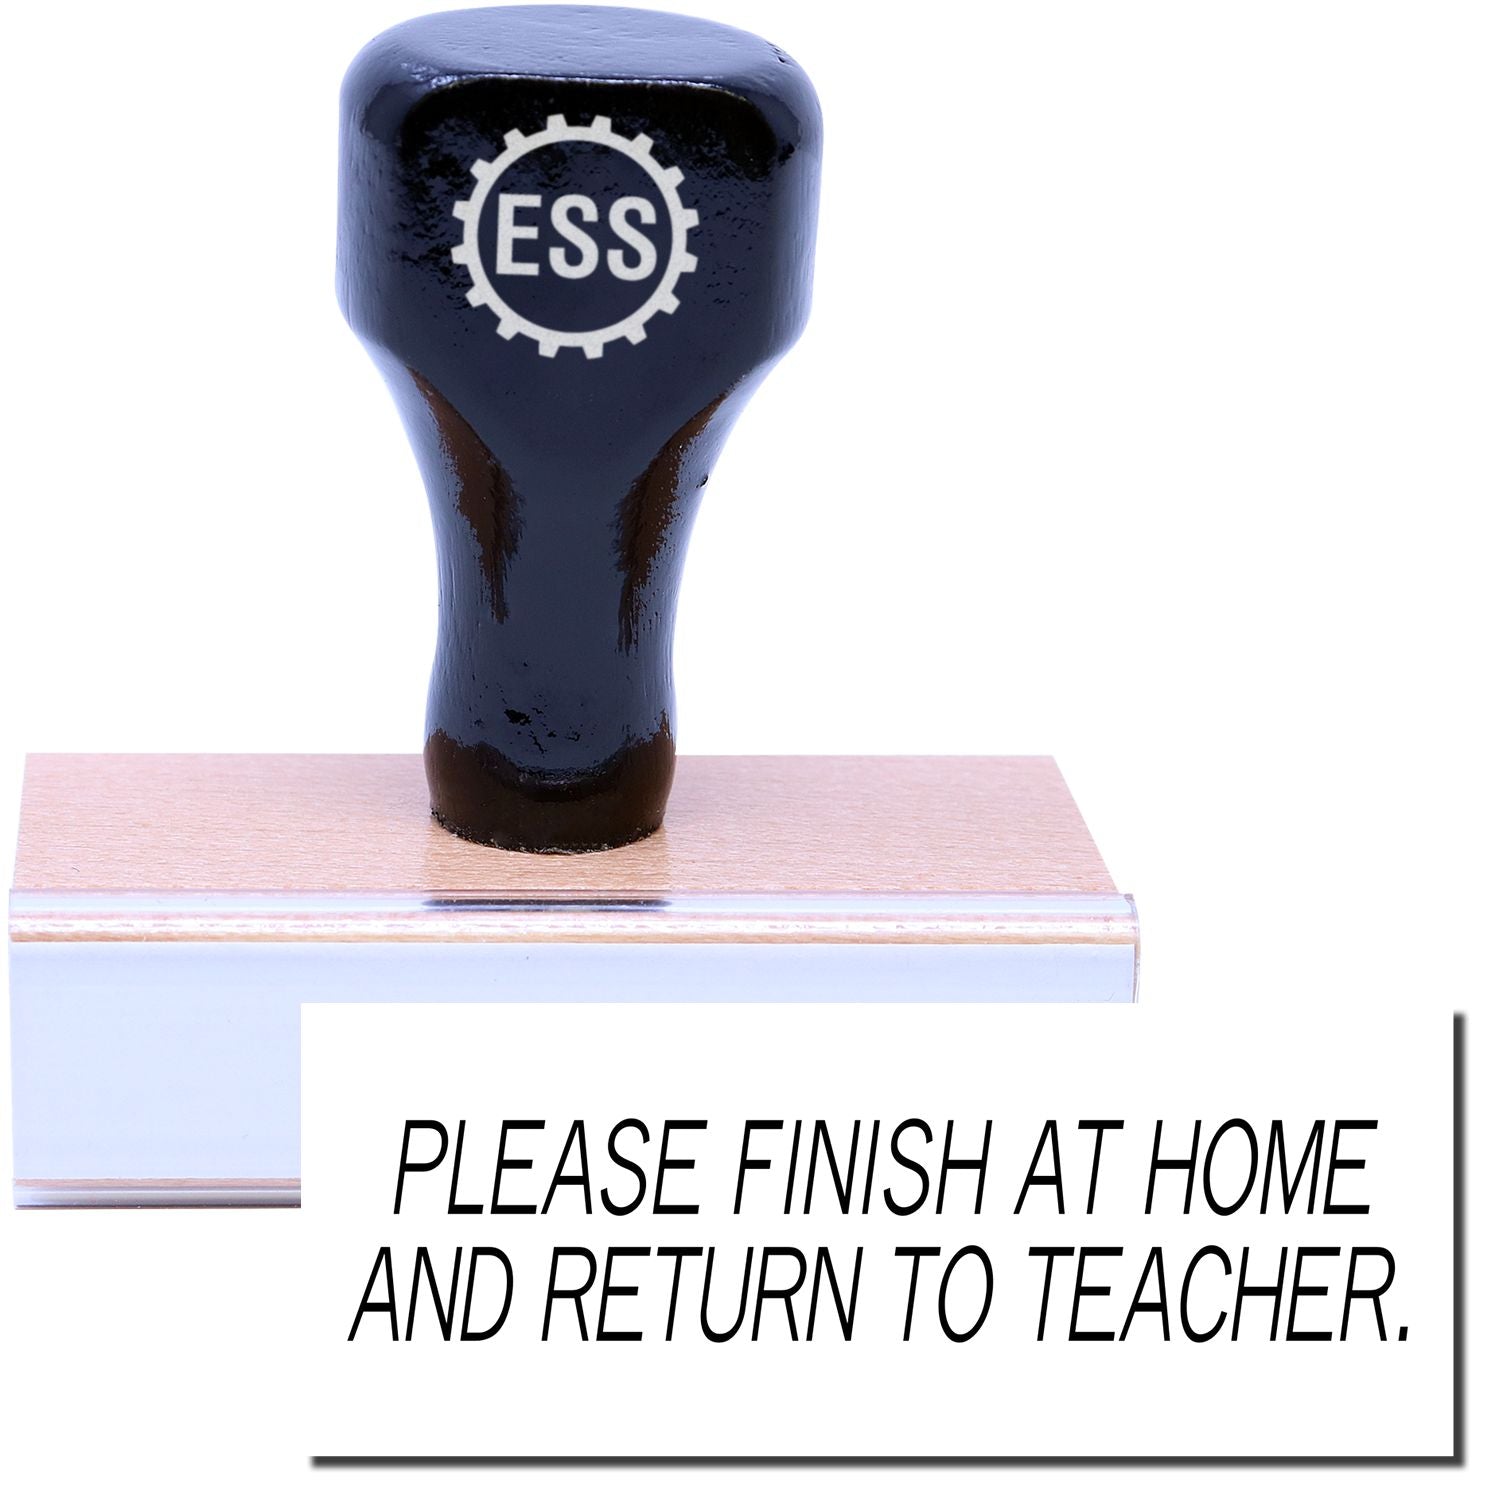 A stock office rubber stamp with a stamped image showing how the text "PLEASE FINISH AT HOME AND RETURN TO TEACHER." is displayed after stamping.